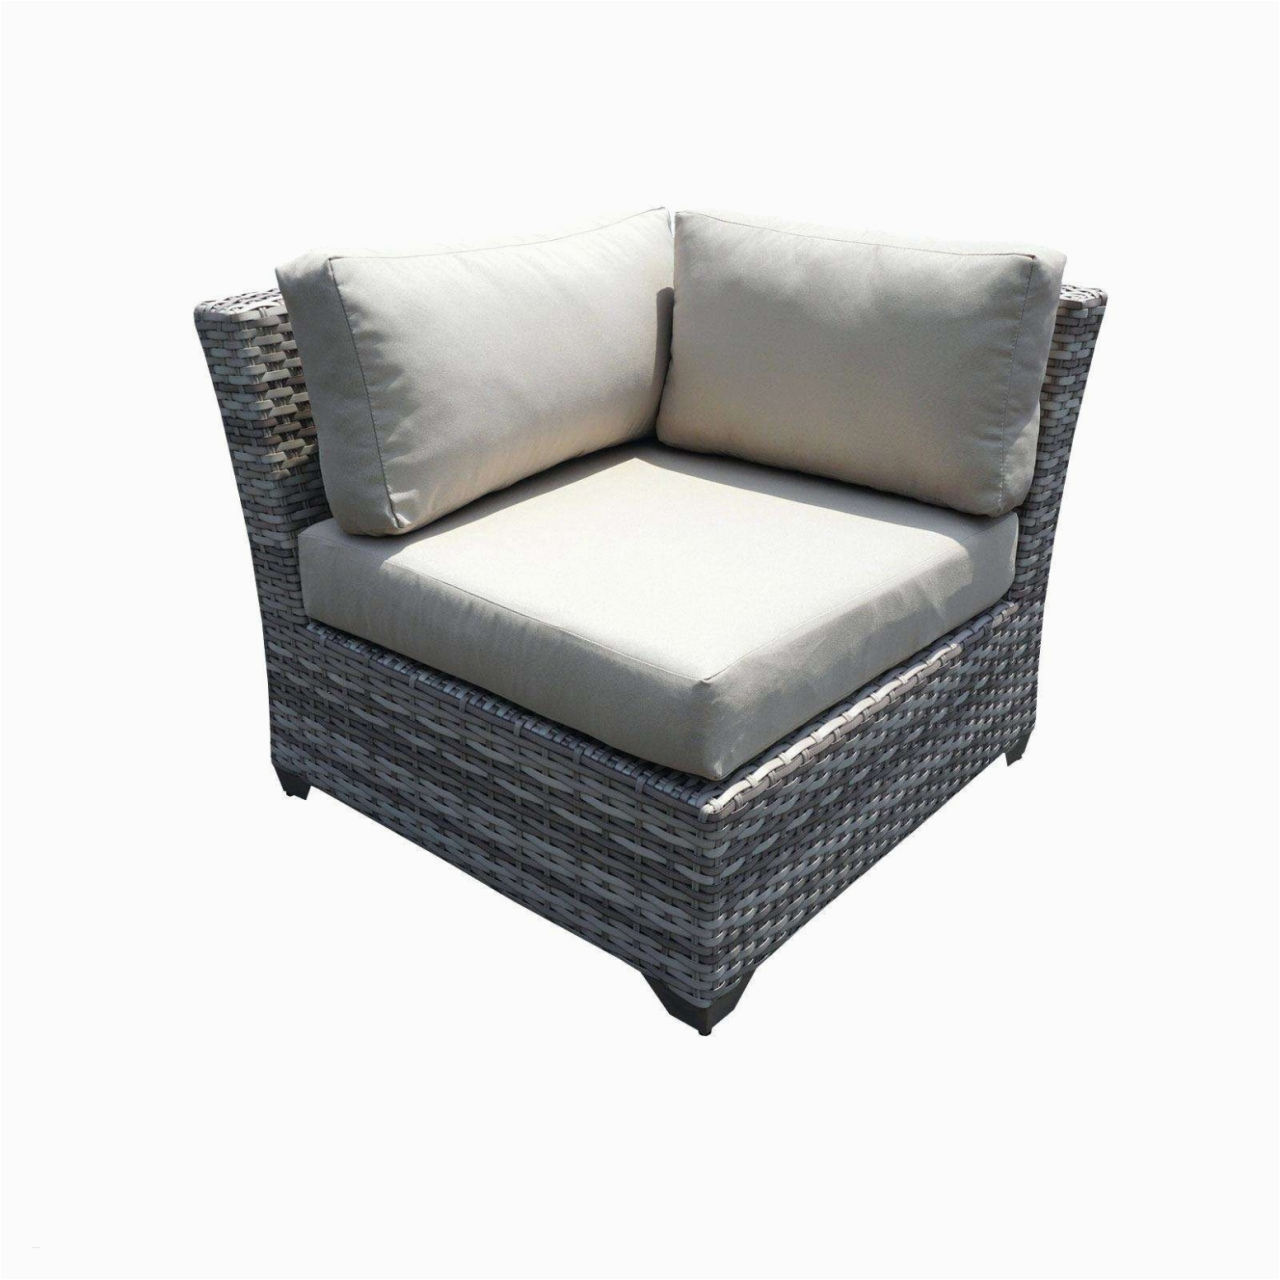 daybed couch couch discount luxus patio furniture daybed patio daybed 0d kimya durch daybed couch